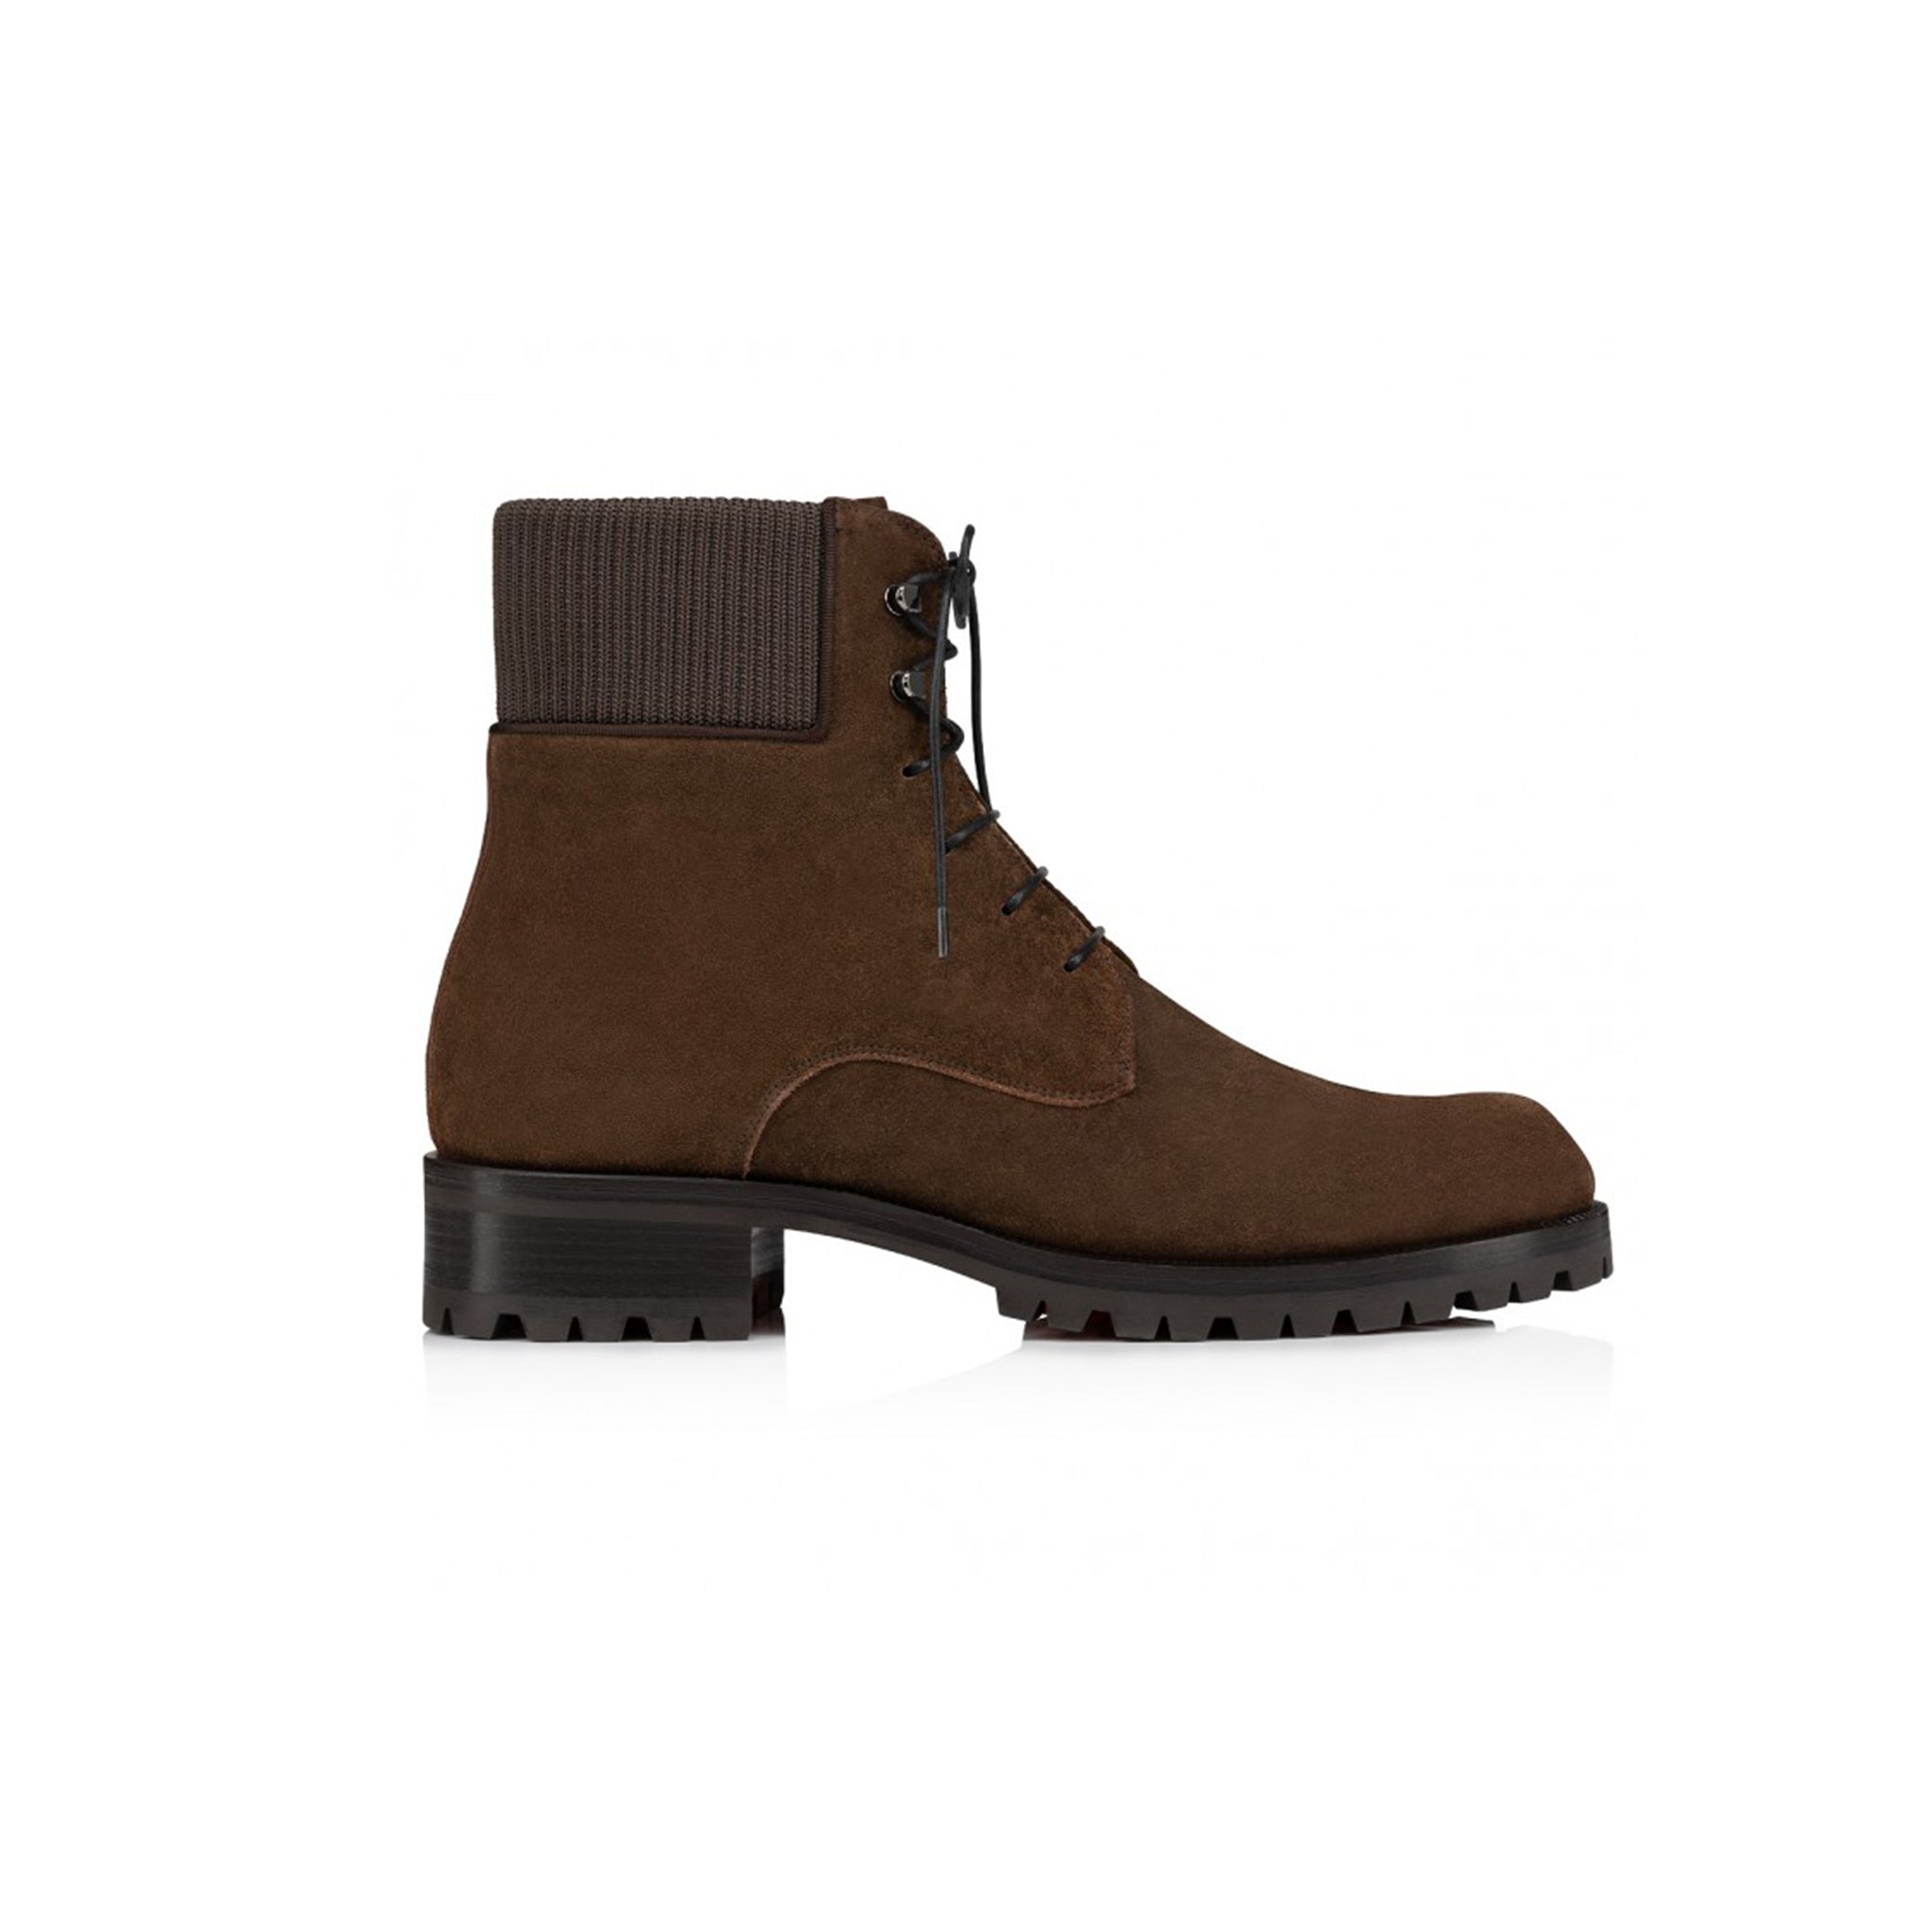 Cocoa Suede Men's Boots